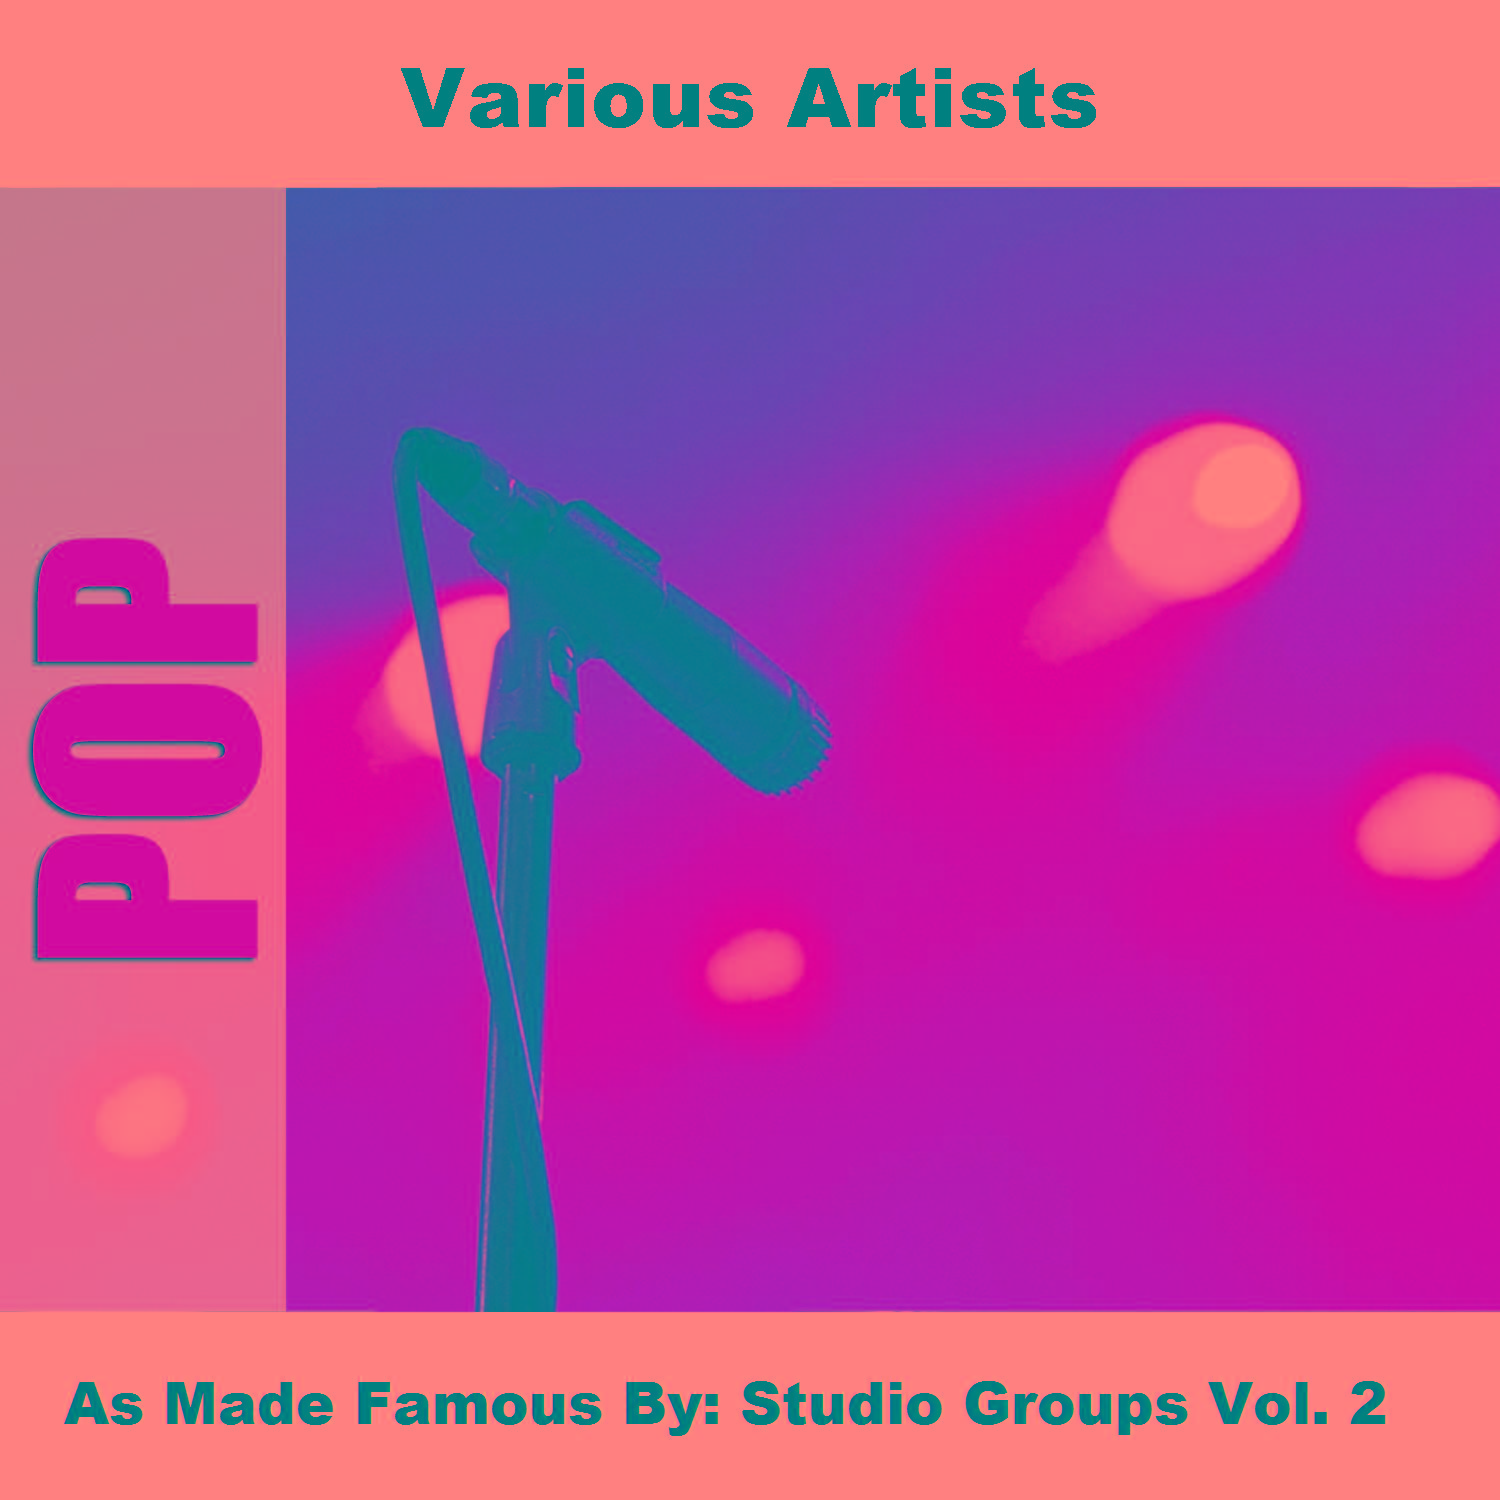 As Made Famous By: Studio Groups Vol. 2